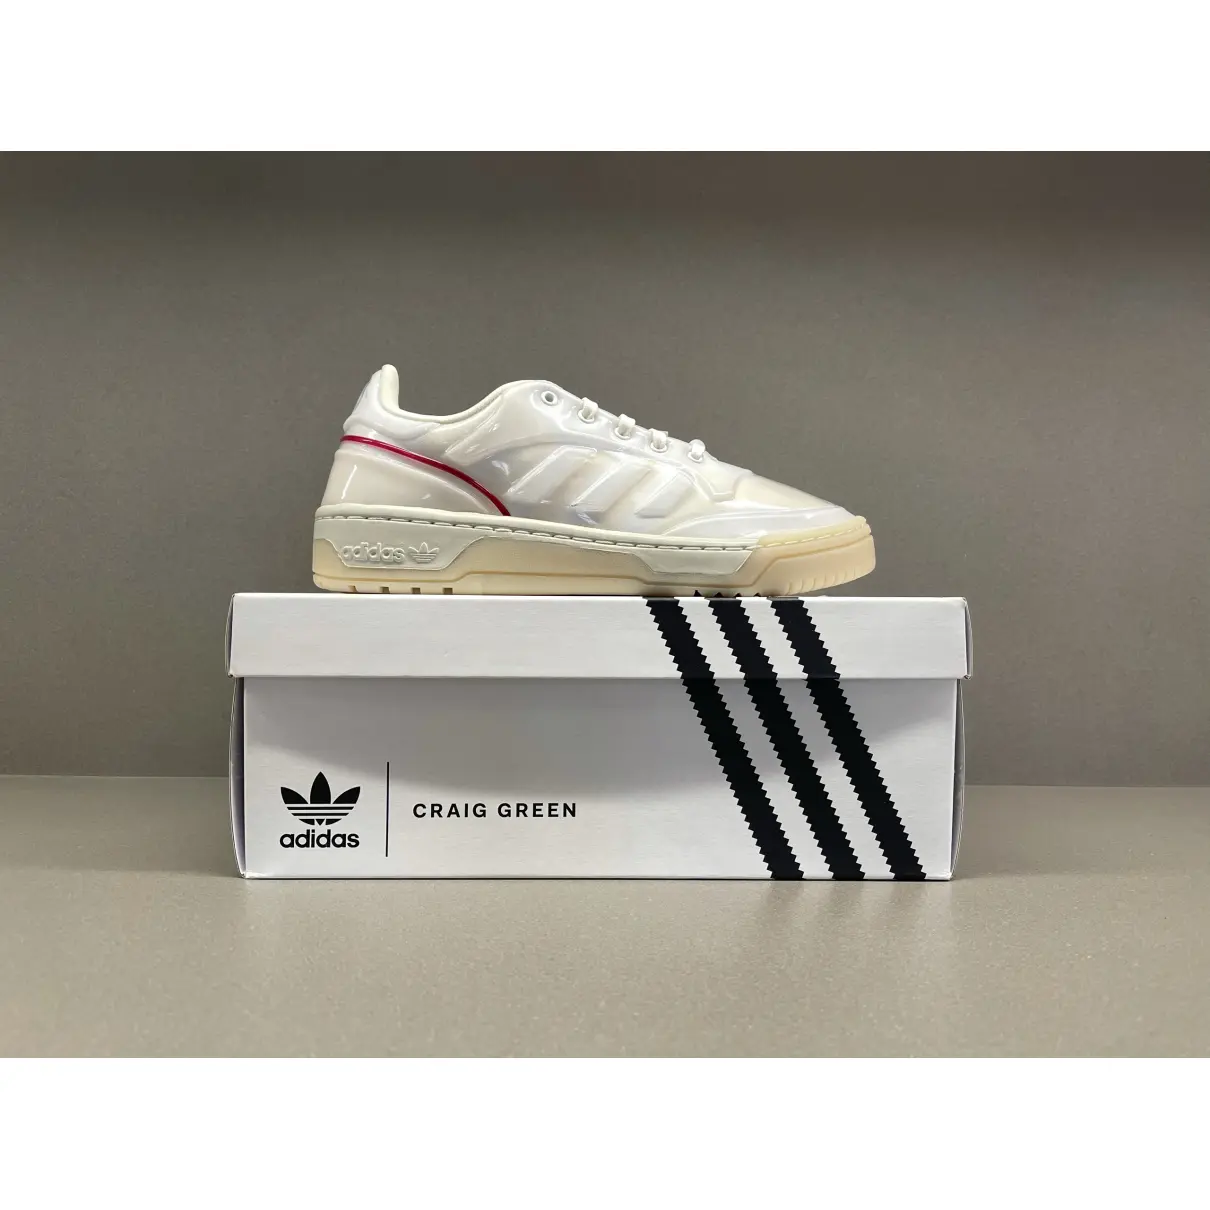 Buy Adidas x Craig Green Low trainers online